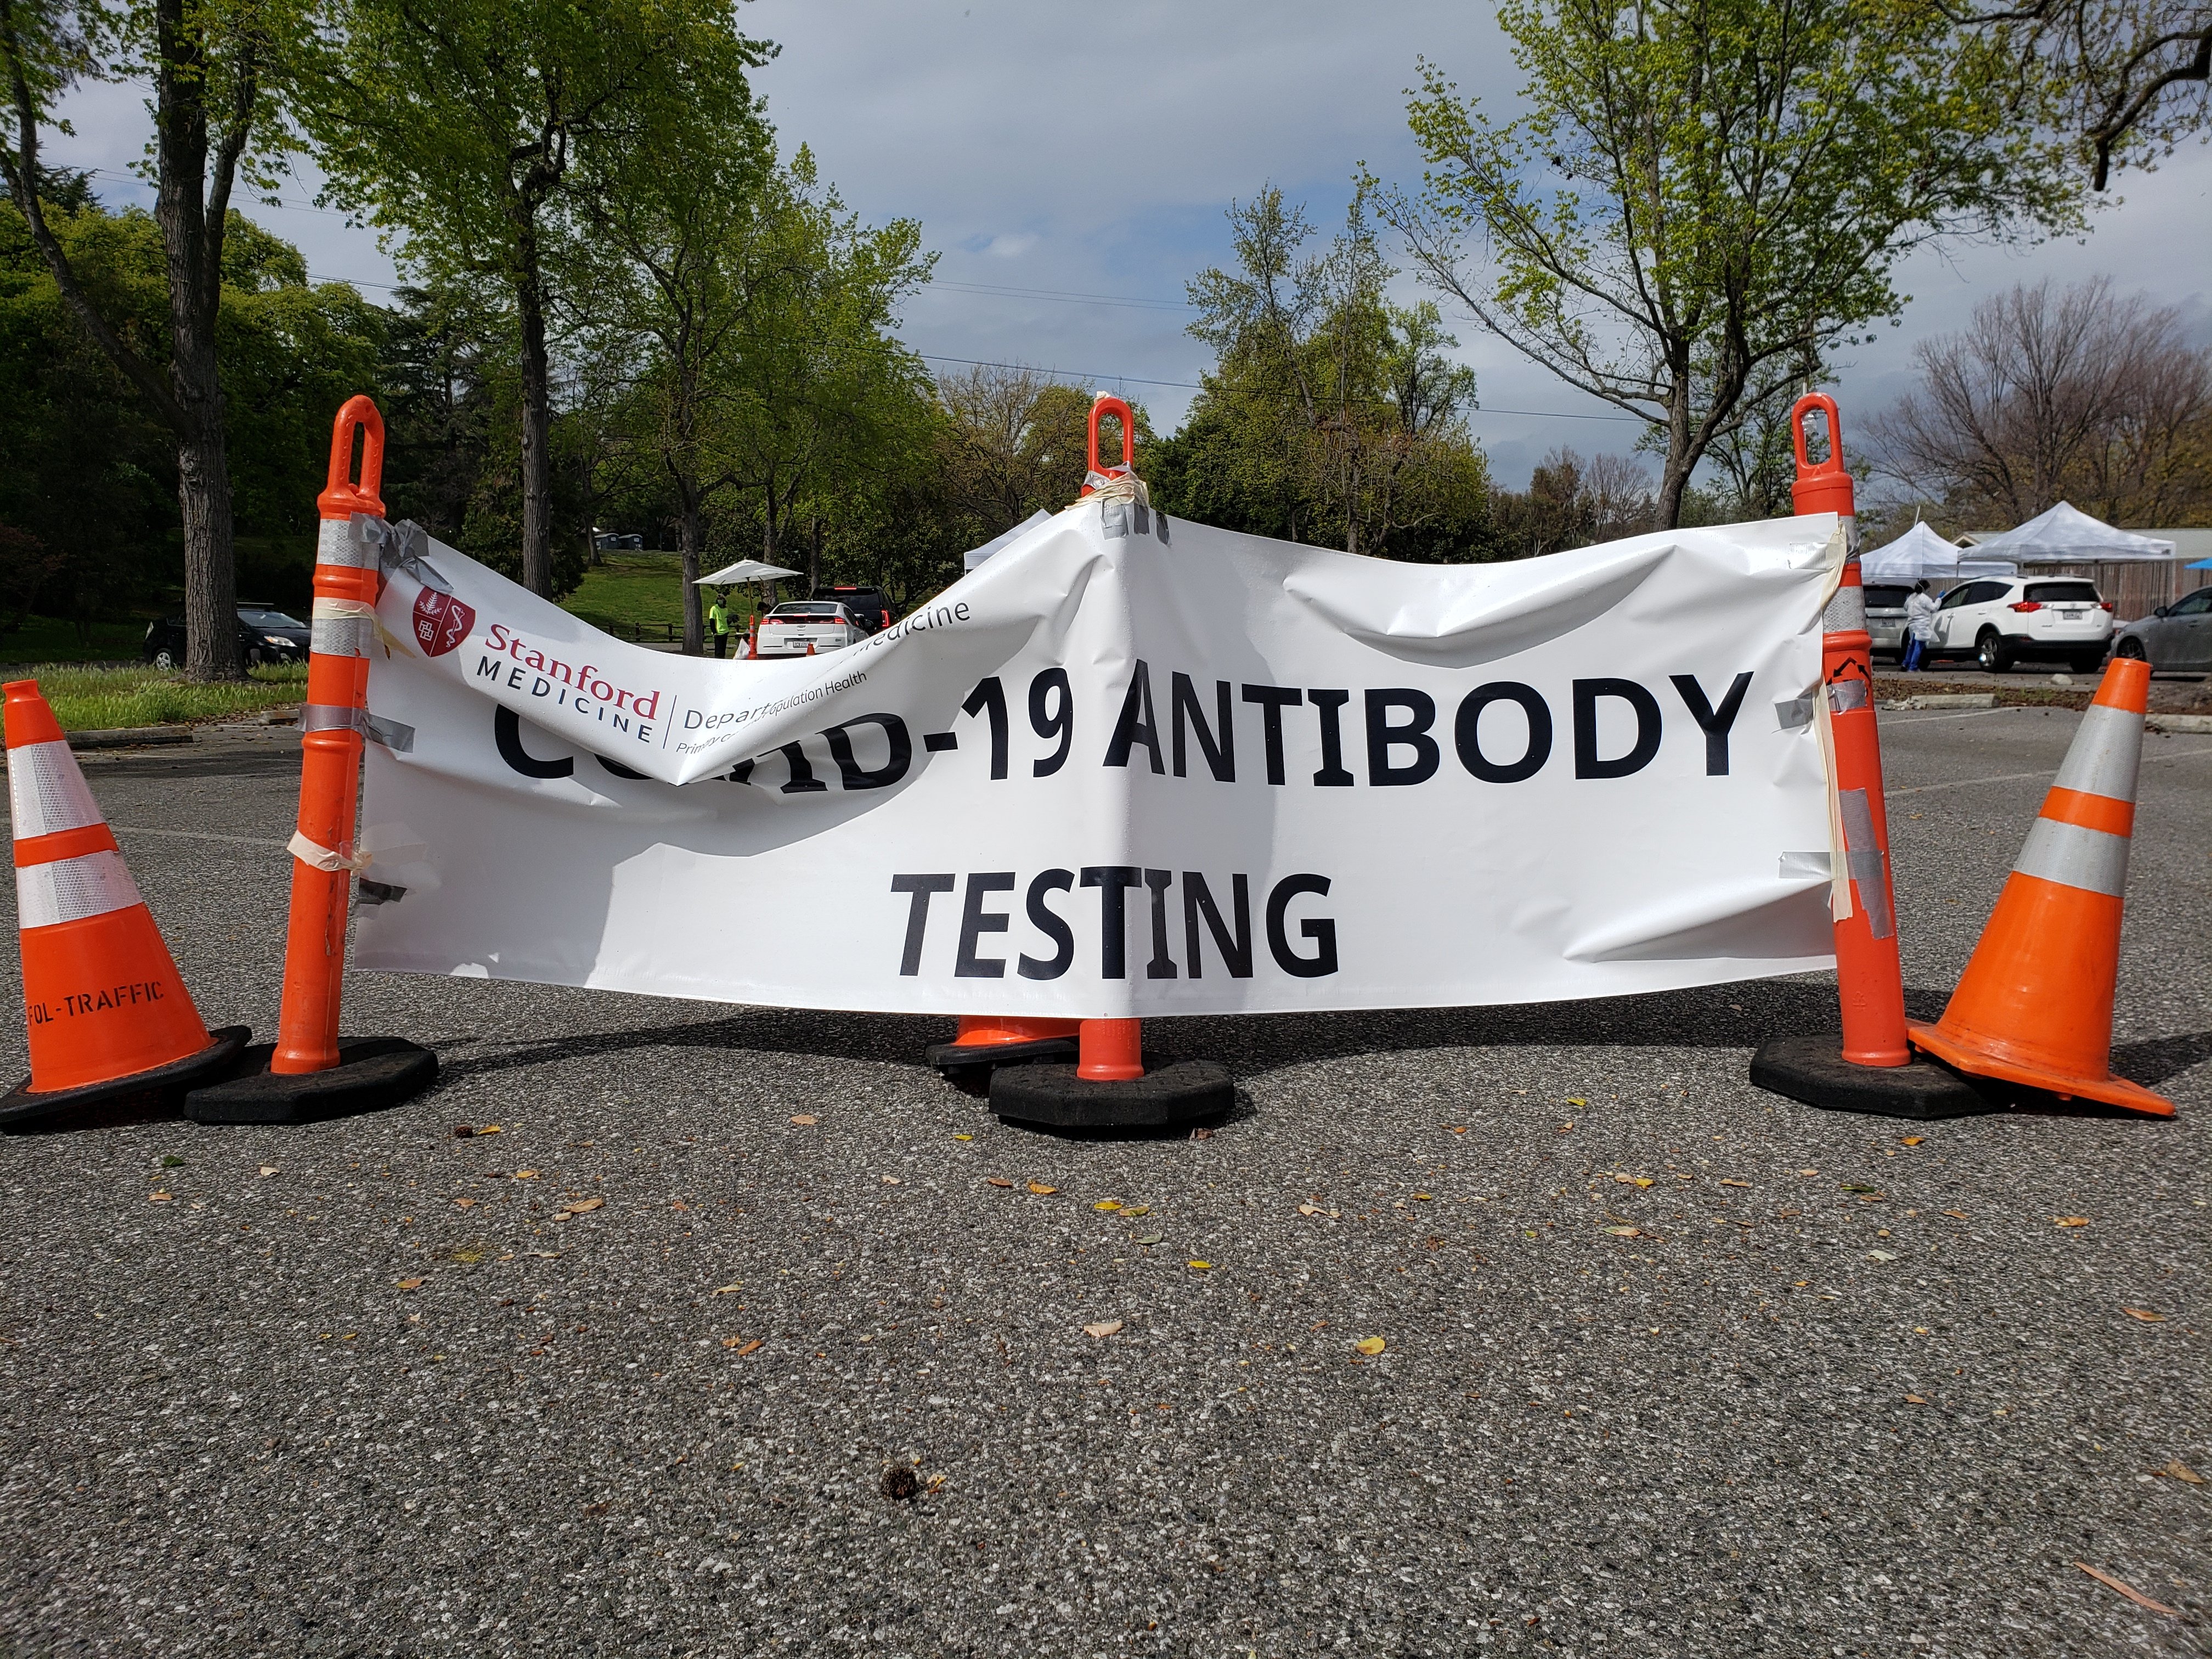 A sign directing people to 'COVID-19 antibody testing' is attached to traffic cones in a parking lot.